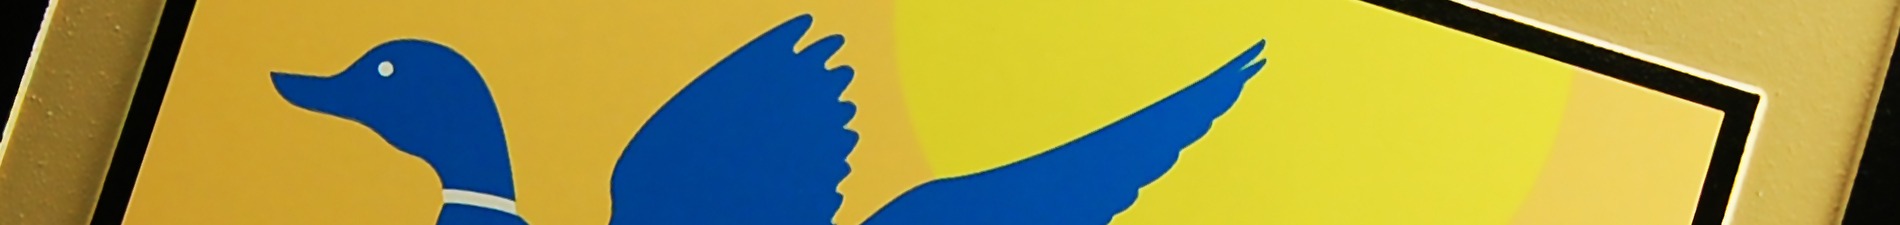 Header image closeup of plaque with UV-printed, blue and yellow seal of U.S. Fish & Wildlife Service